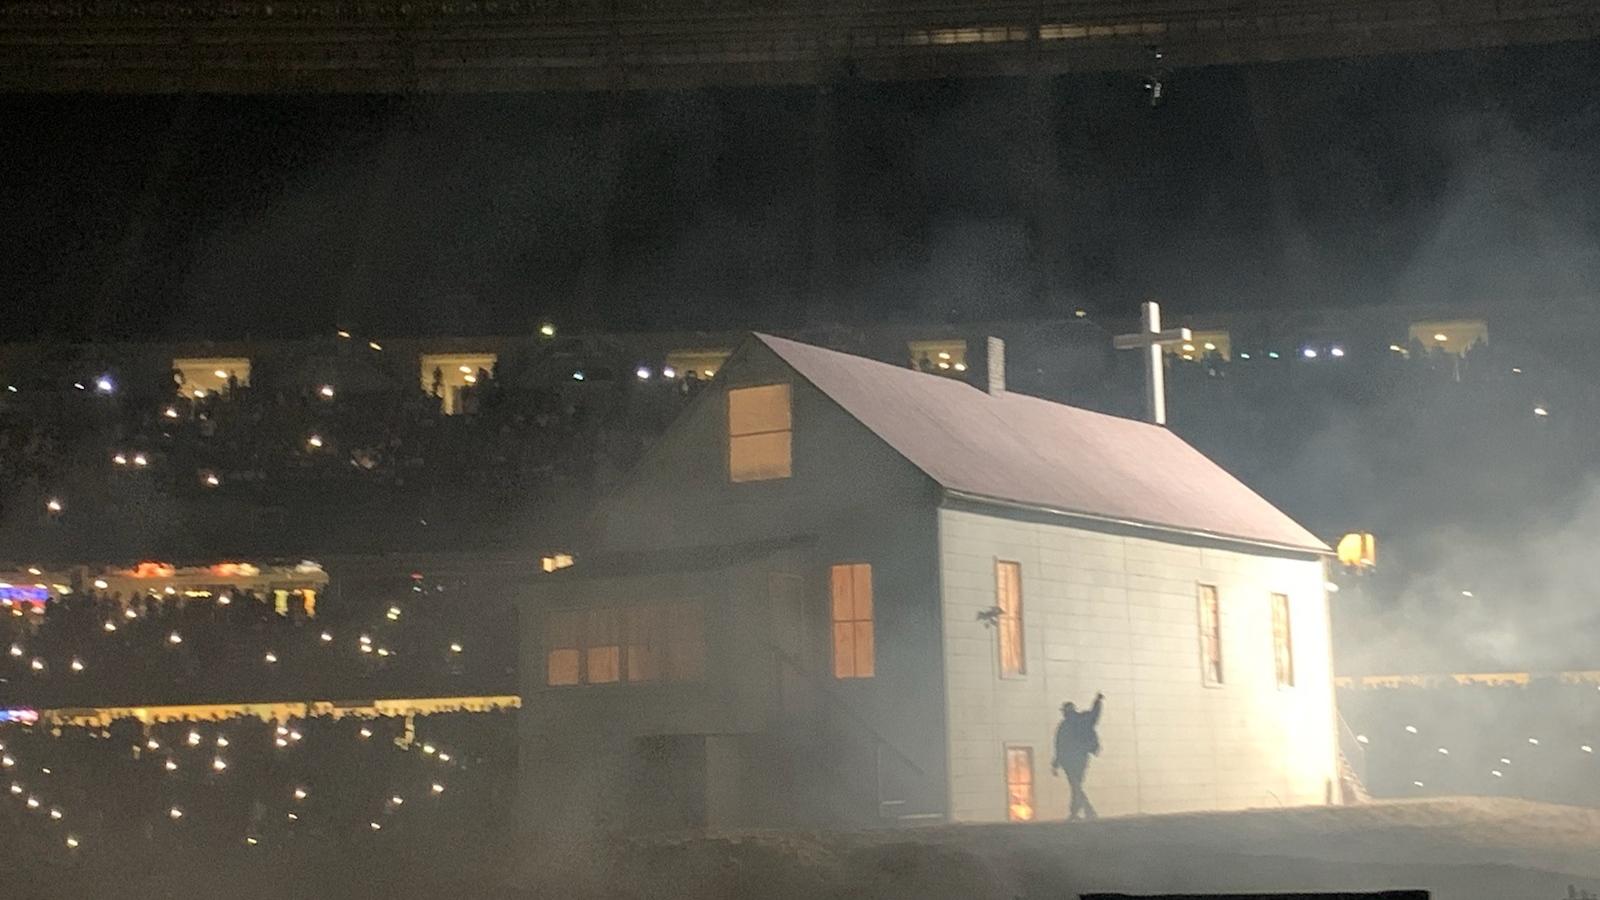 Kanye West’s “Donda” listening party at Soldier Field on Thursday, Aug. 26, 2021 included a replica of his childhood South Shore home. (Angel Idowu / WTTW News)